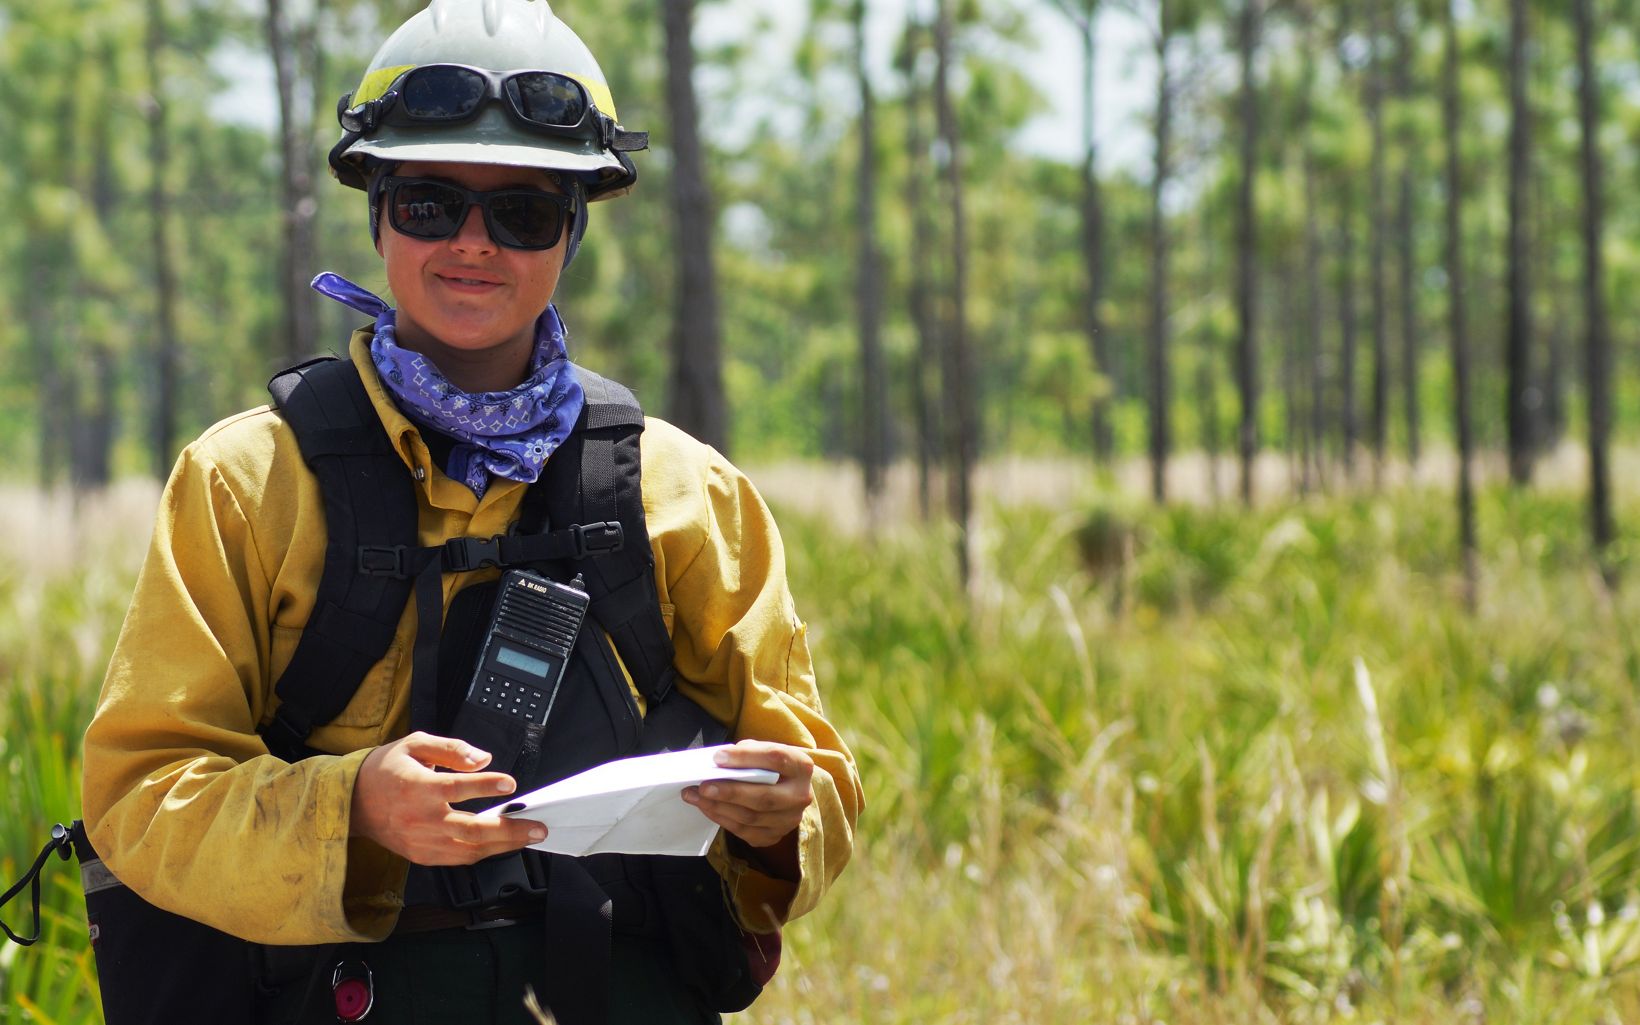 Learning Laboratory Student Conservation Association intern Katie Spengler spent a year working at Disney Wilderness Preserve learning about conservation and participating in prescribe fires. © Hannah O'Malley/TNC